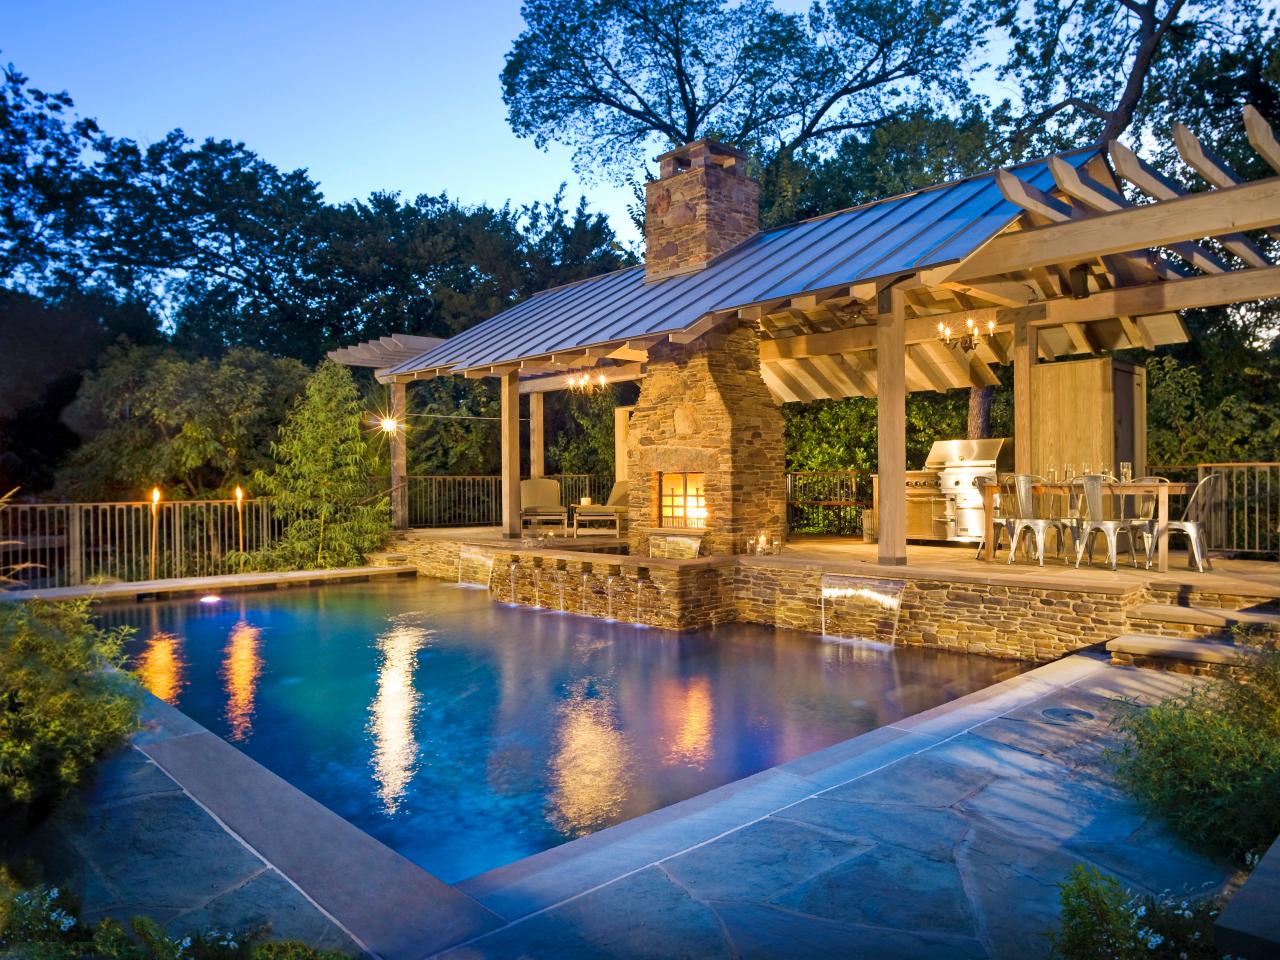 outdoor kitchen and pool photo - 3